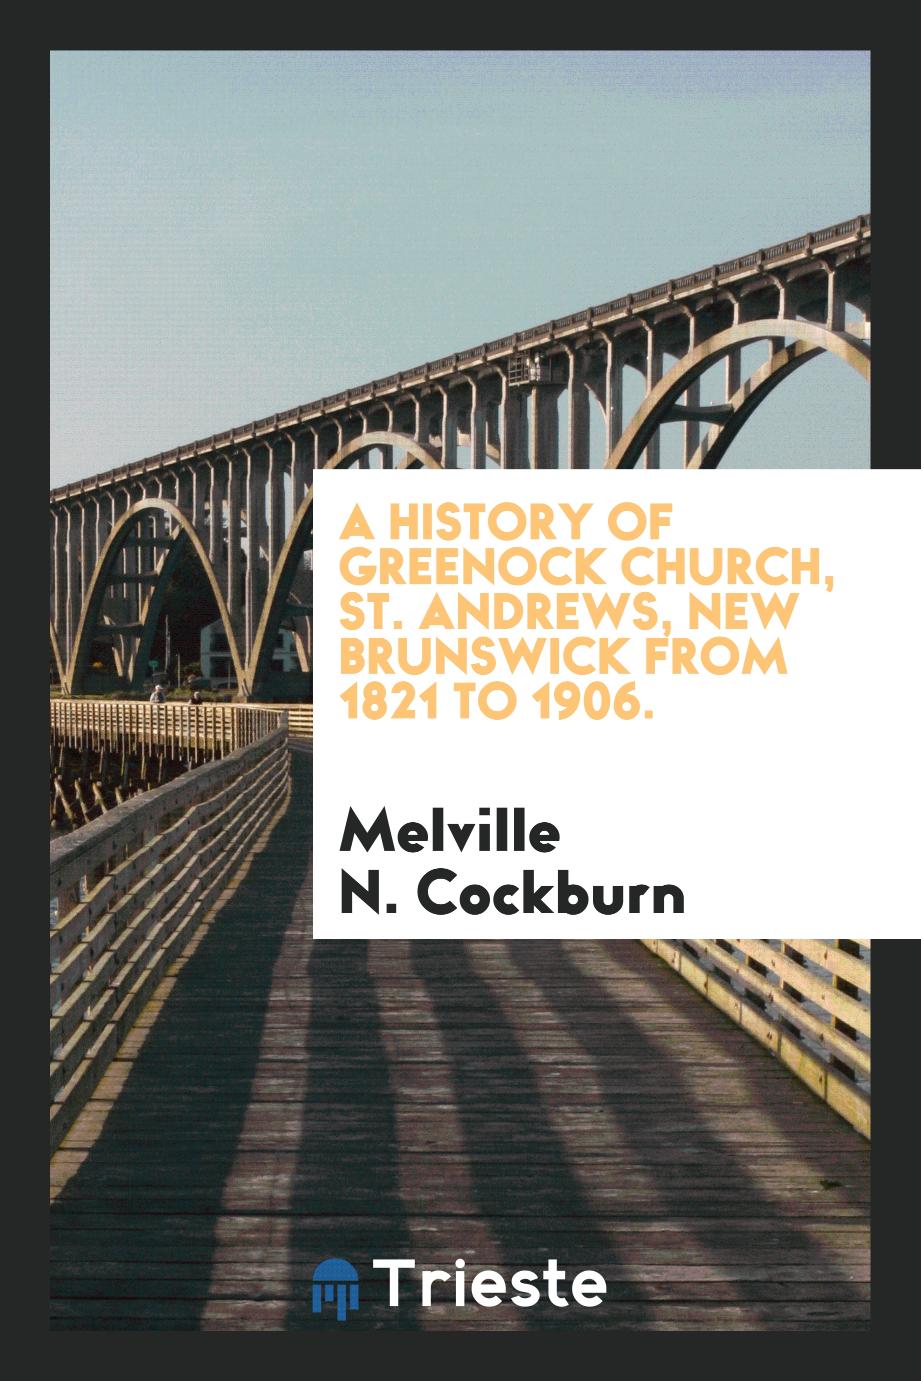 Melville N. Cockburn - A history of Greenock Church, St. Andrews, New Brunswick from 1821 to 1906.